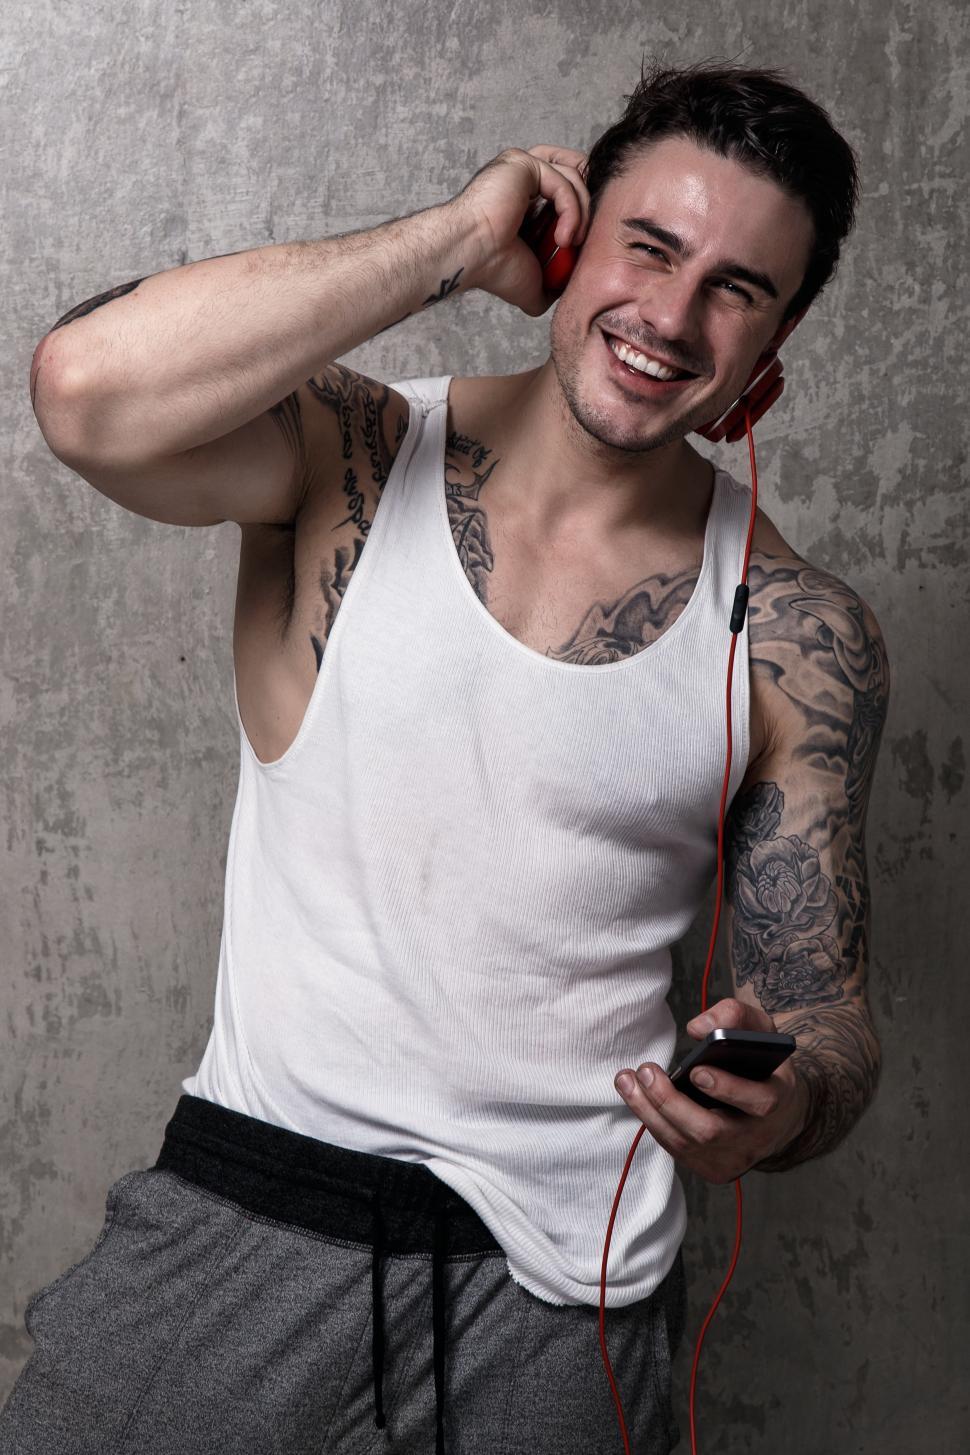 Free Image of Happy man with tattoos listening to music 